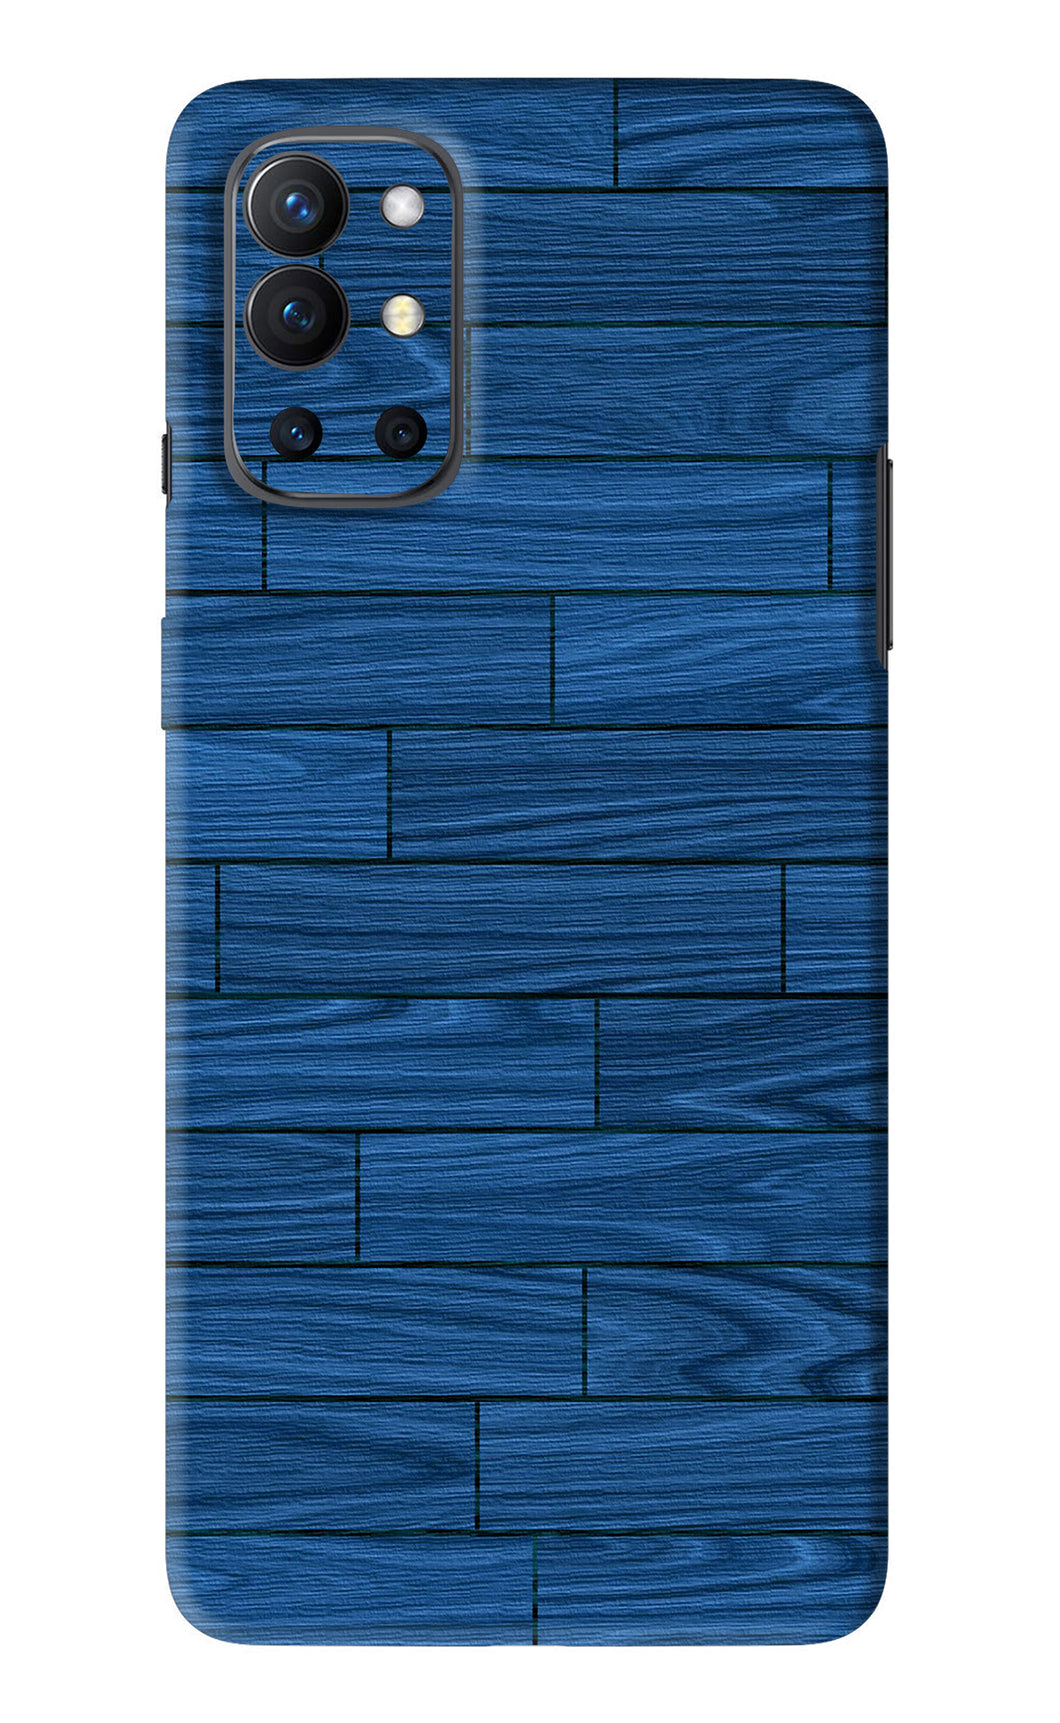 Blue Wooden Texture OnePlus 9R Back Skin Wrap